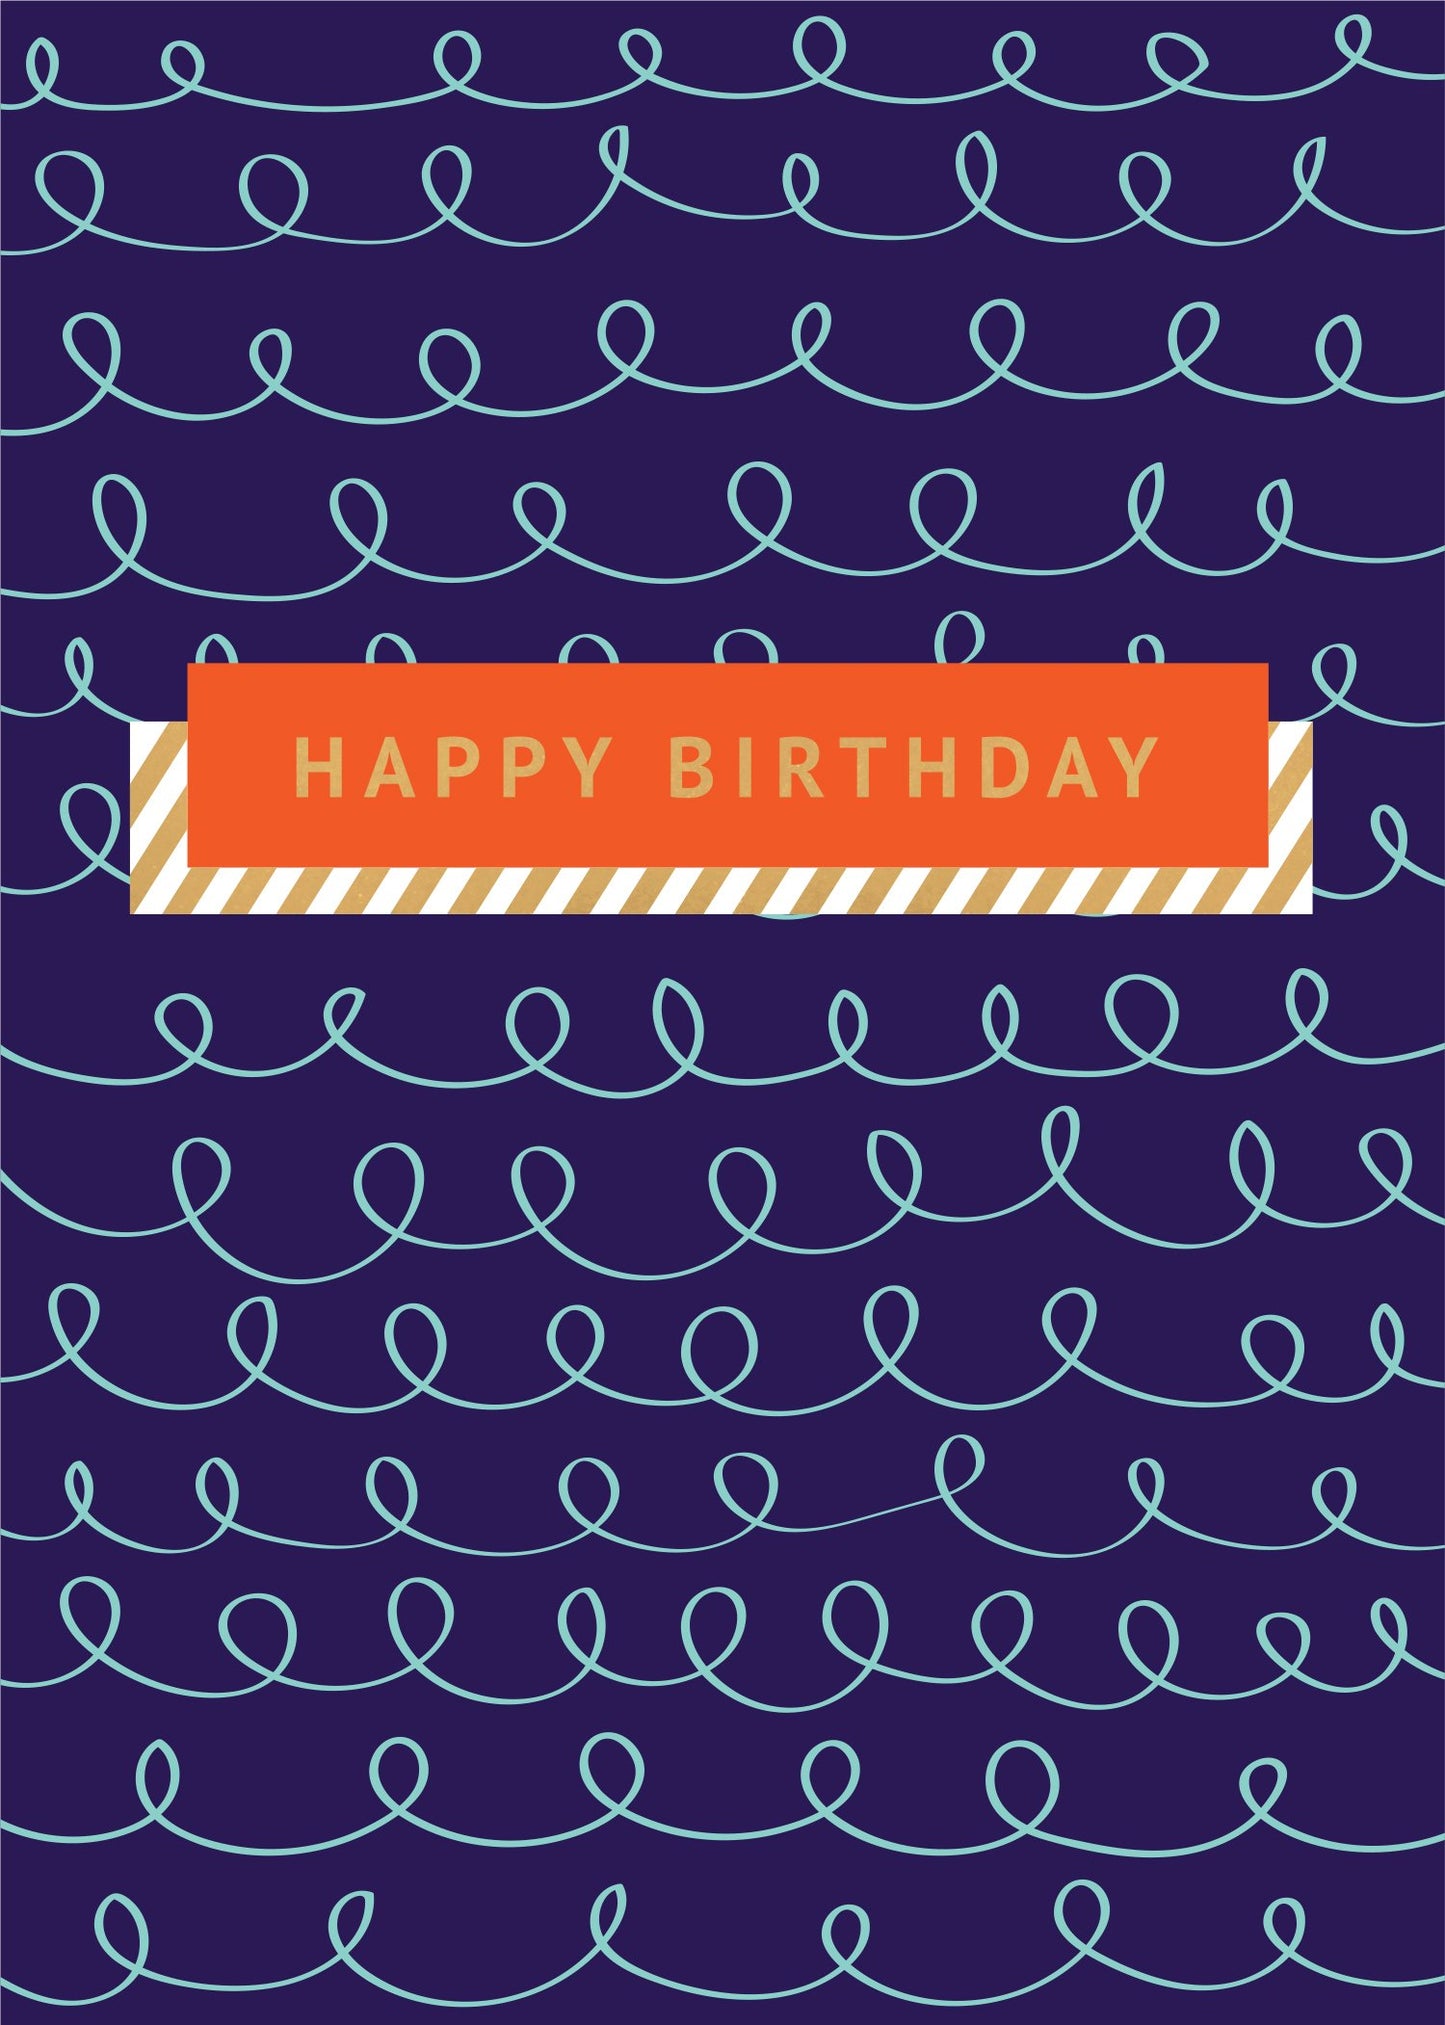 Birthday Card - Squiggly